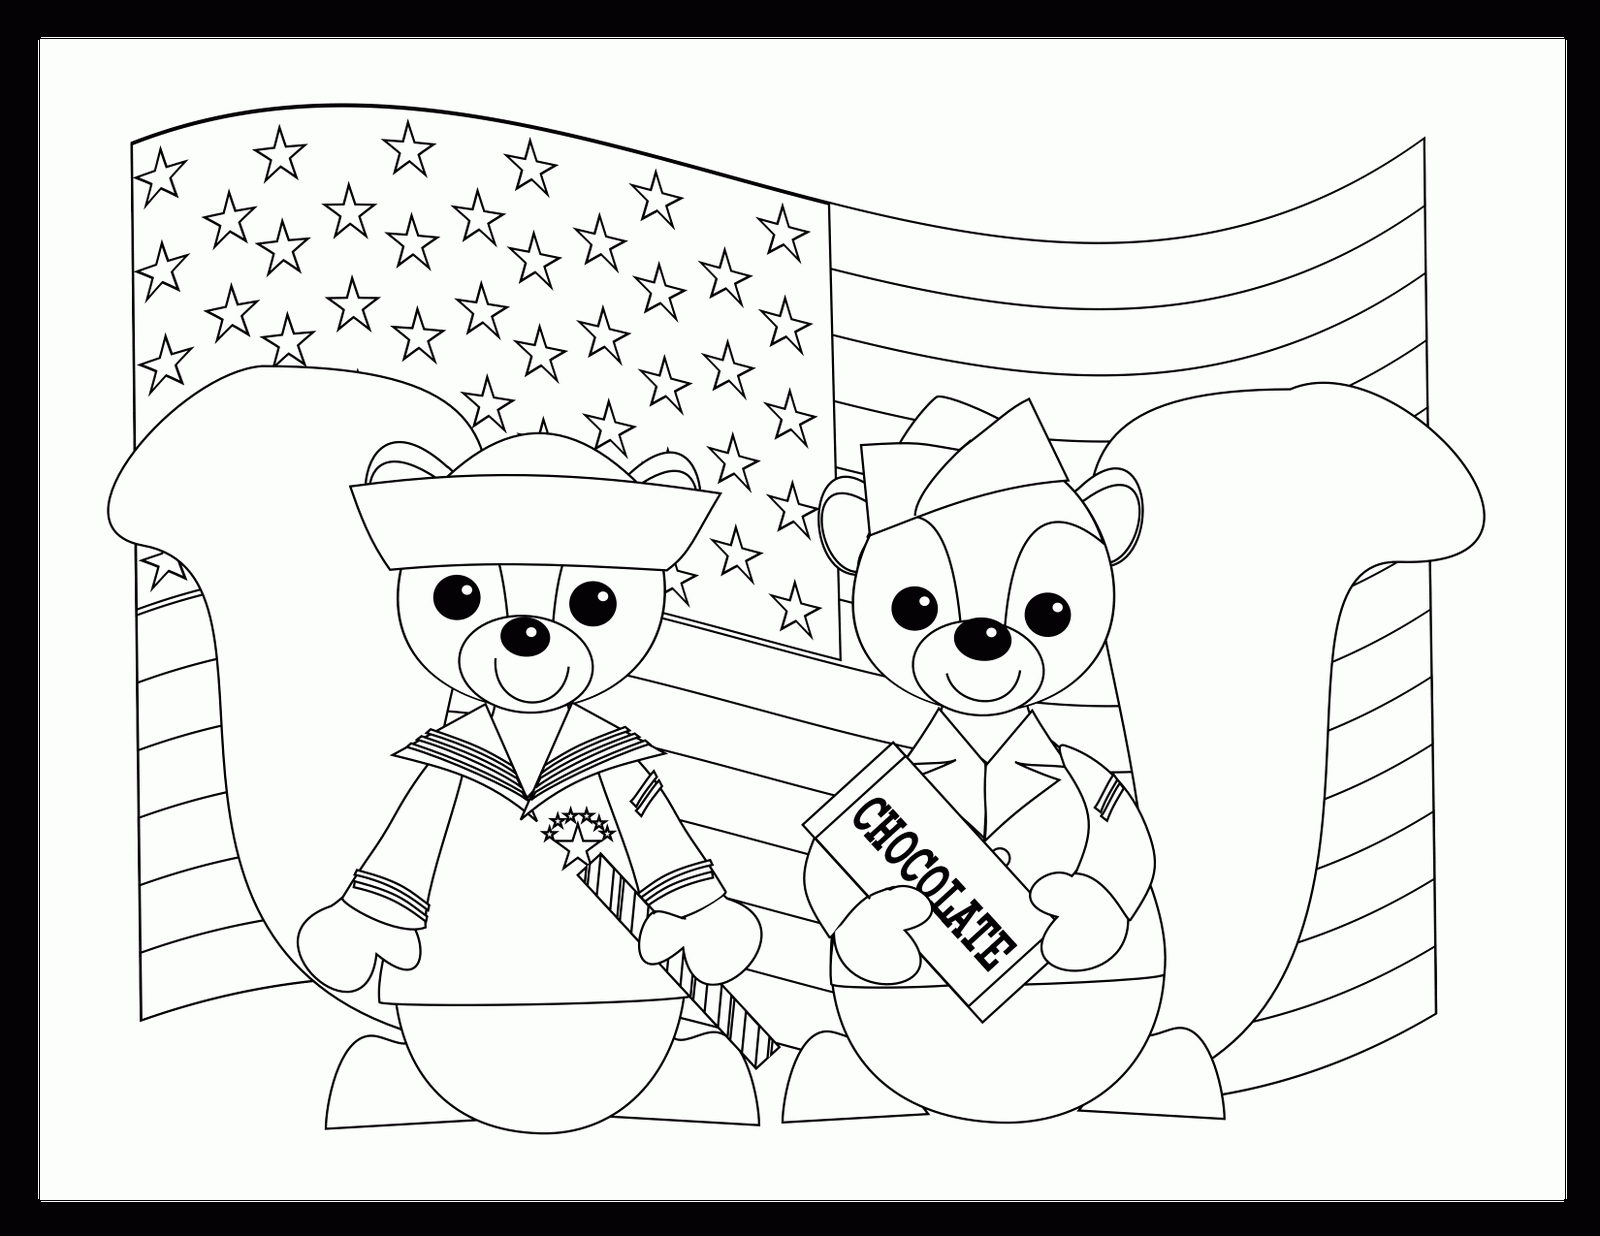 Coloring Pages For Veterans Day   Free Coloring Pages   Coloring Home